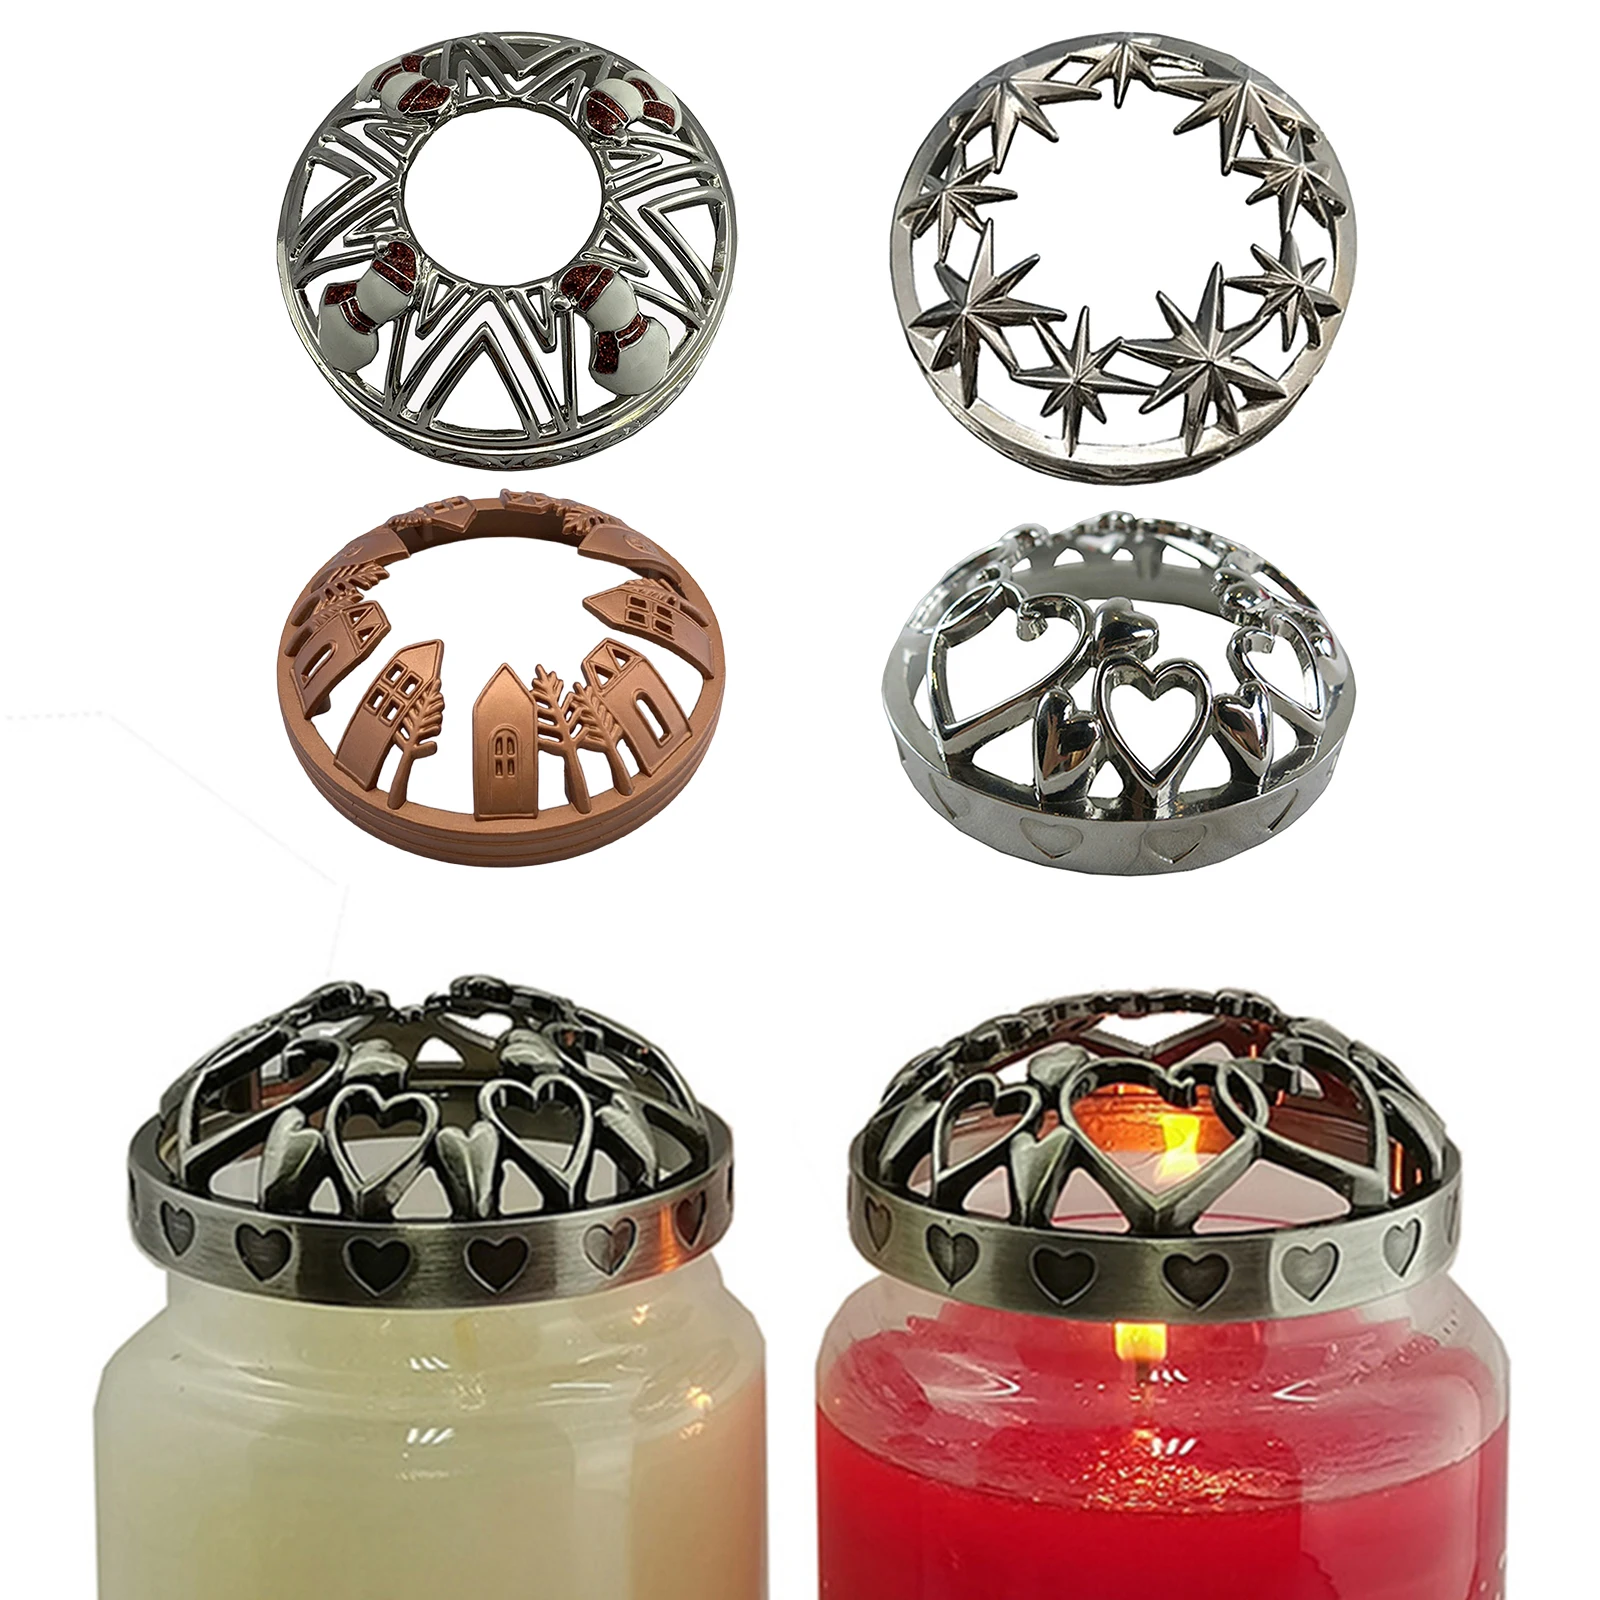 Candles Jar Cover Vintage Tea Light Candle Lids Jar Candles Topper Accessories Shades Sleeves for Jar Candles Home Decor